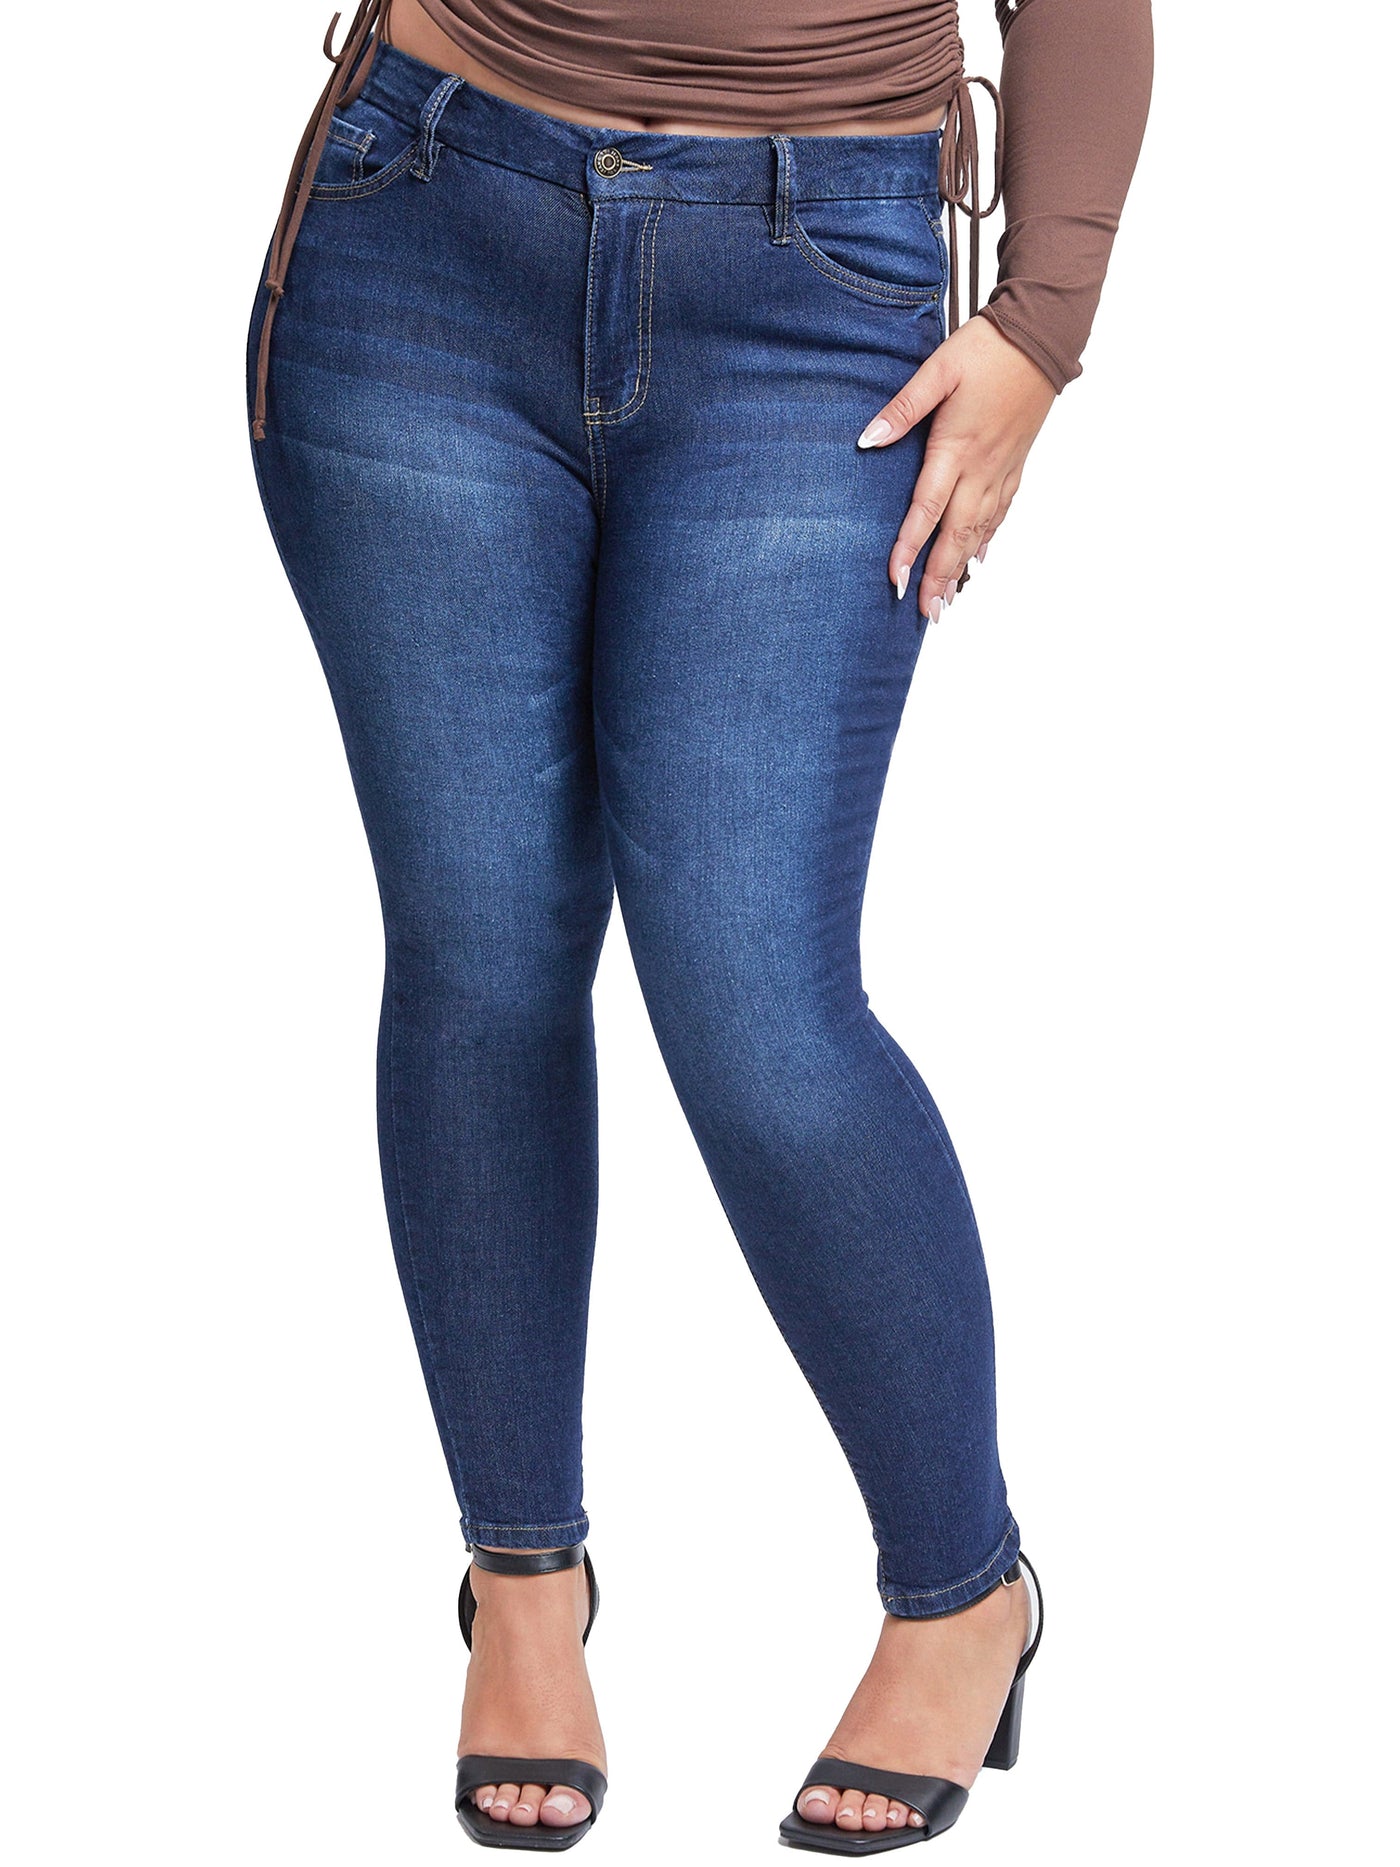 Skinny Jeans for Women Slim Fit Jeans Mid Rise Jeans Plus Size Jeans  Stretch Jeggings Tummy Control Trousers Y2K Denim Jeans